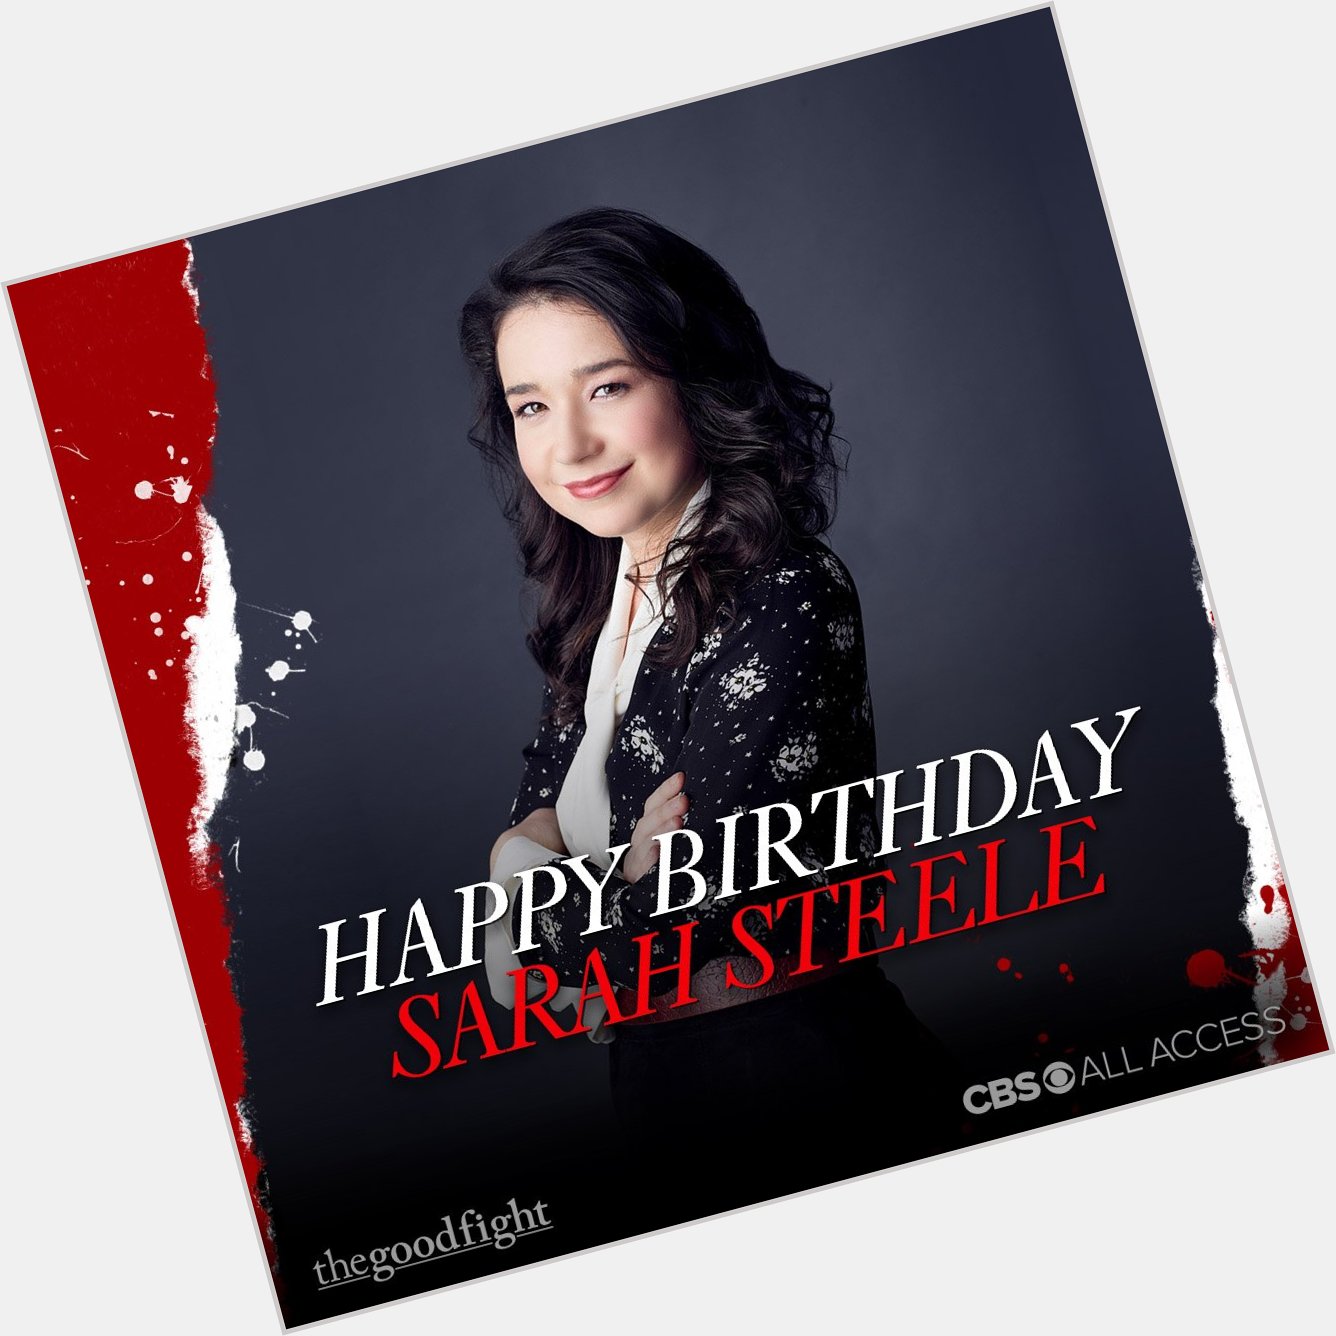 Happy Birthday to Sarah Steele! to show her some love!  